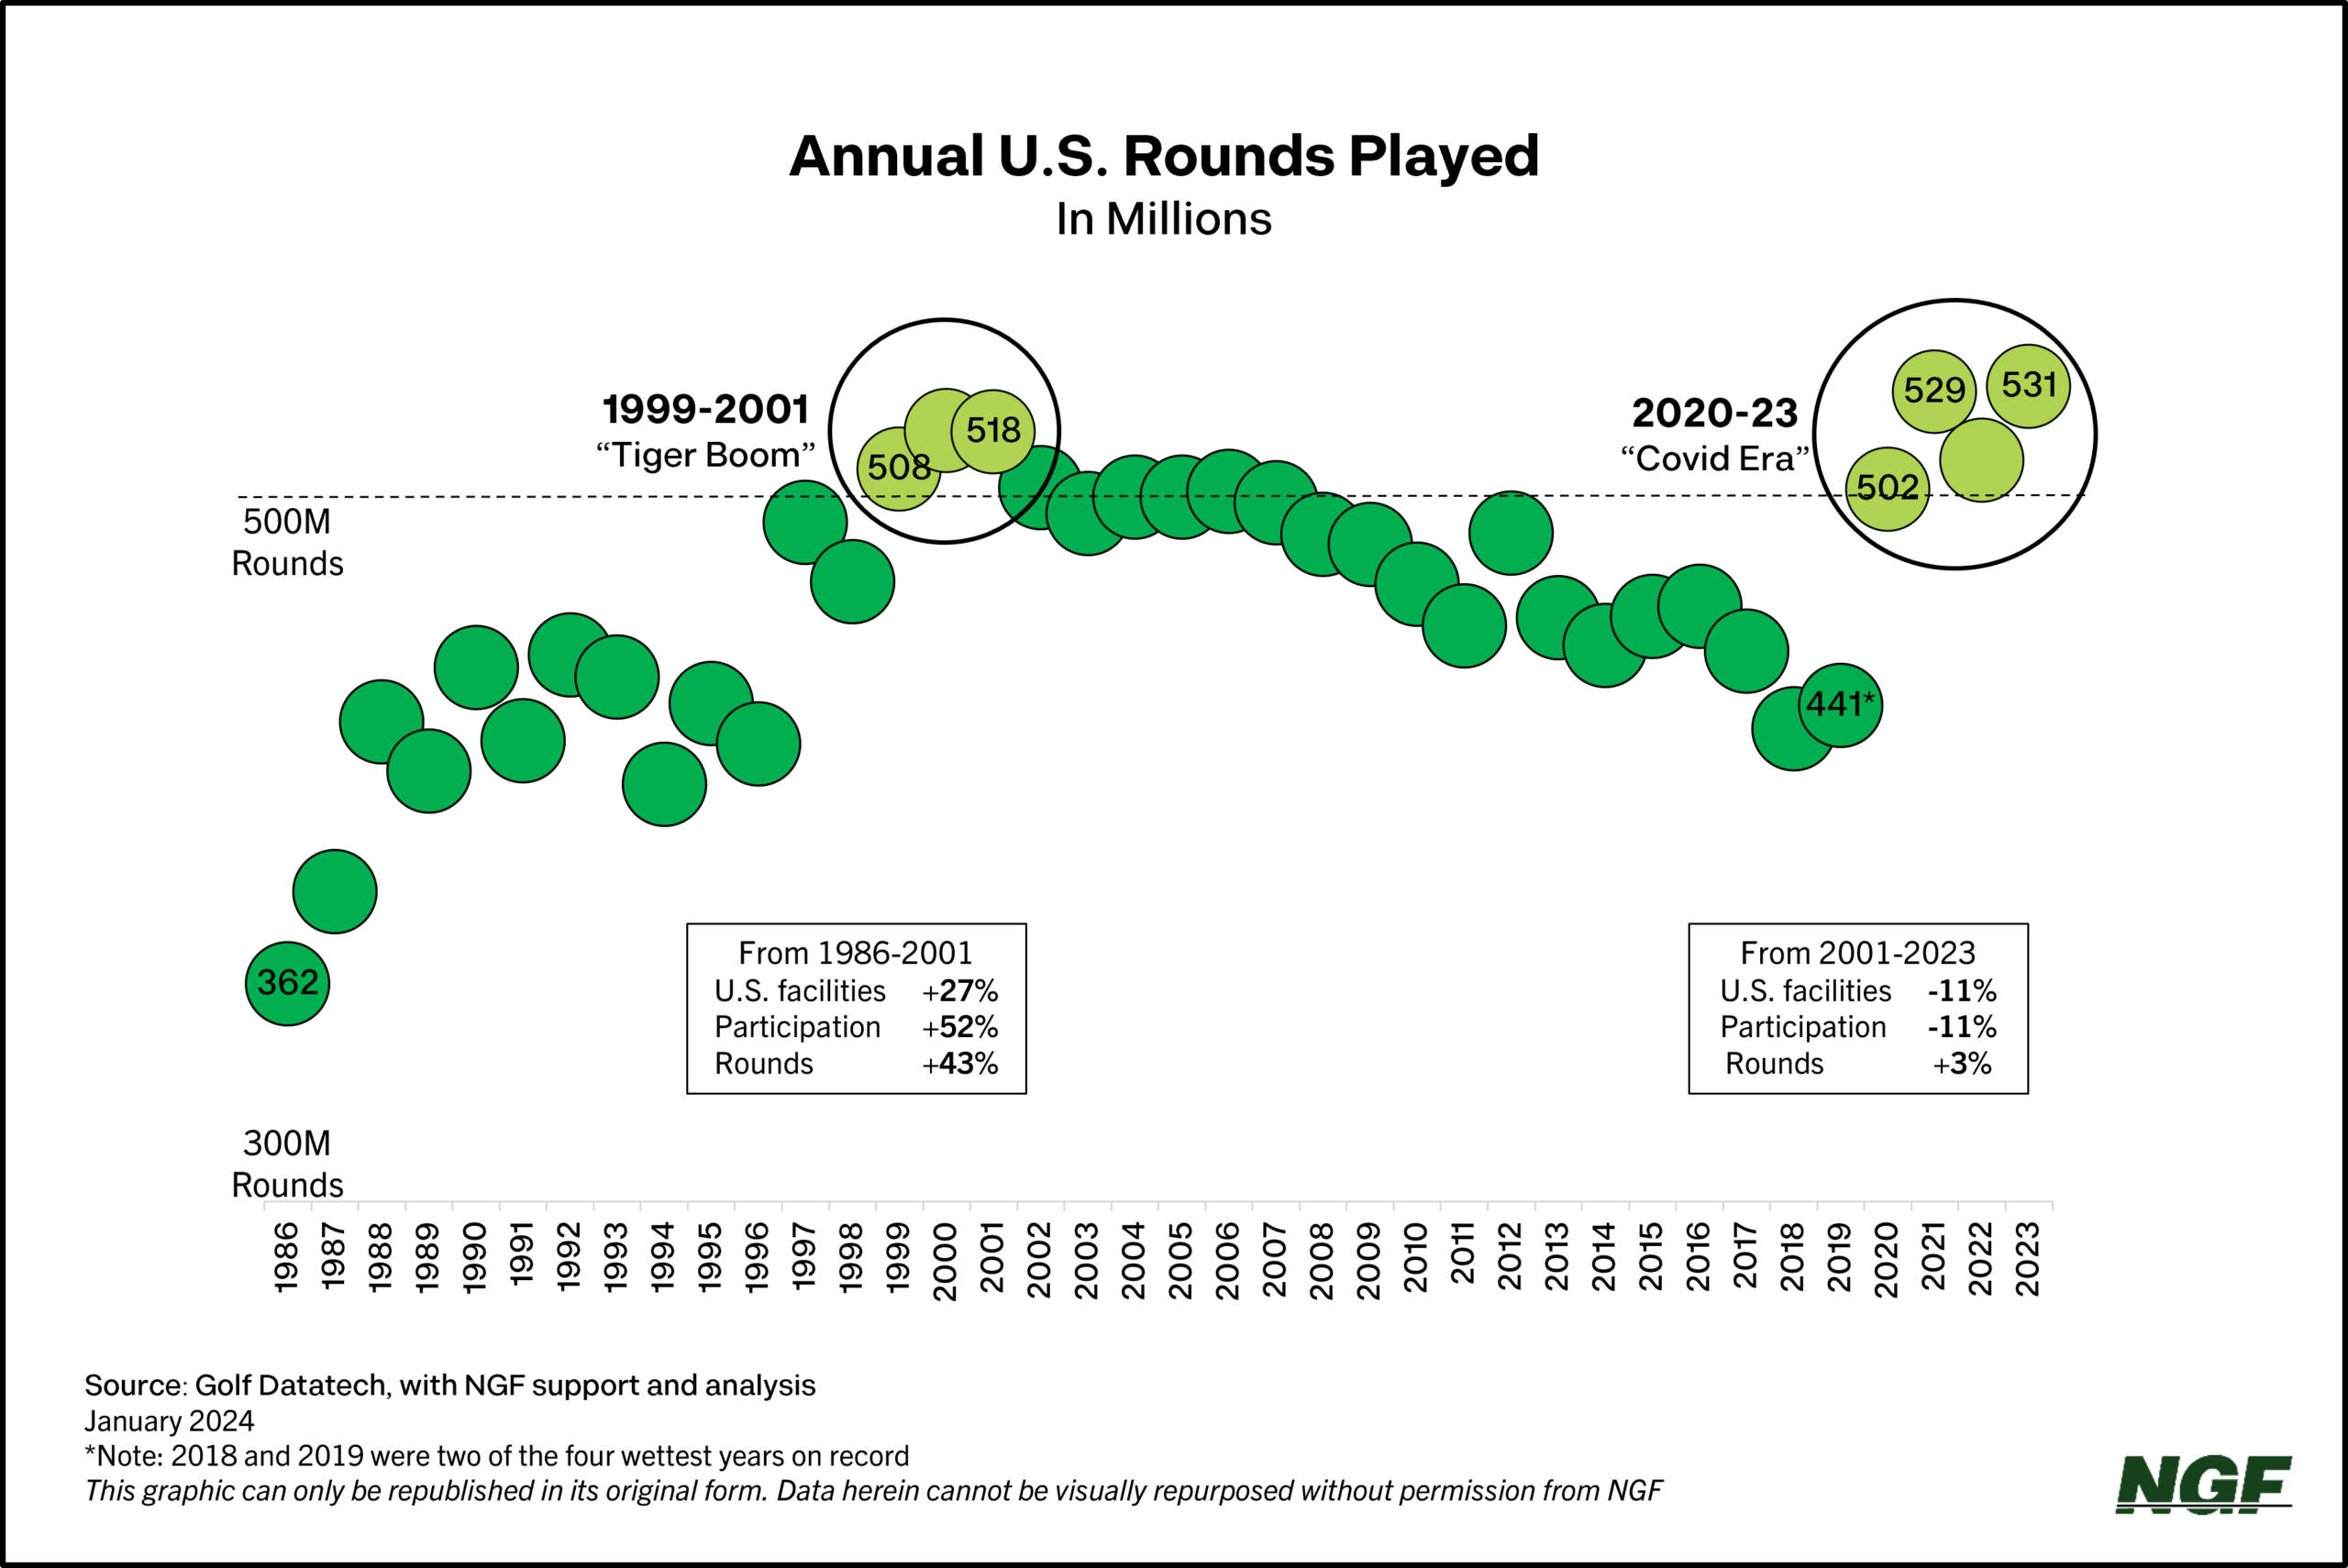 A Record for U.S. Rounds?